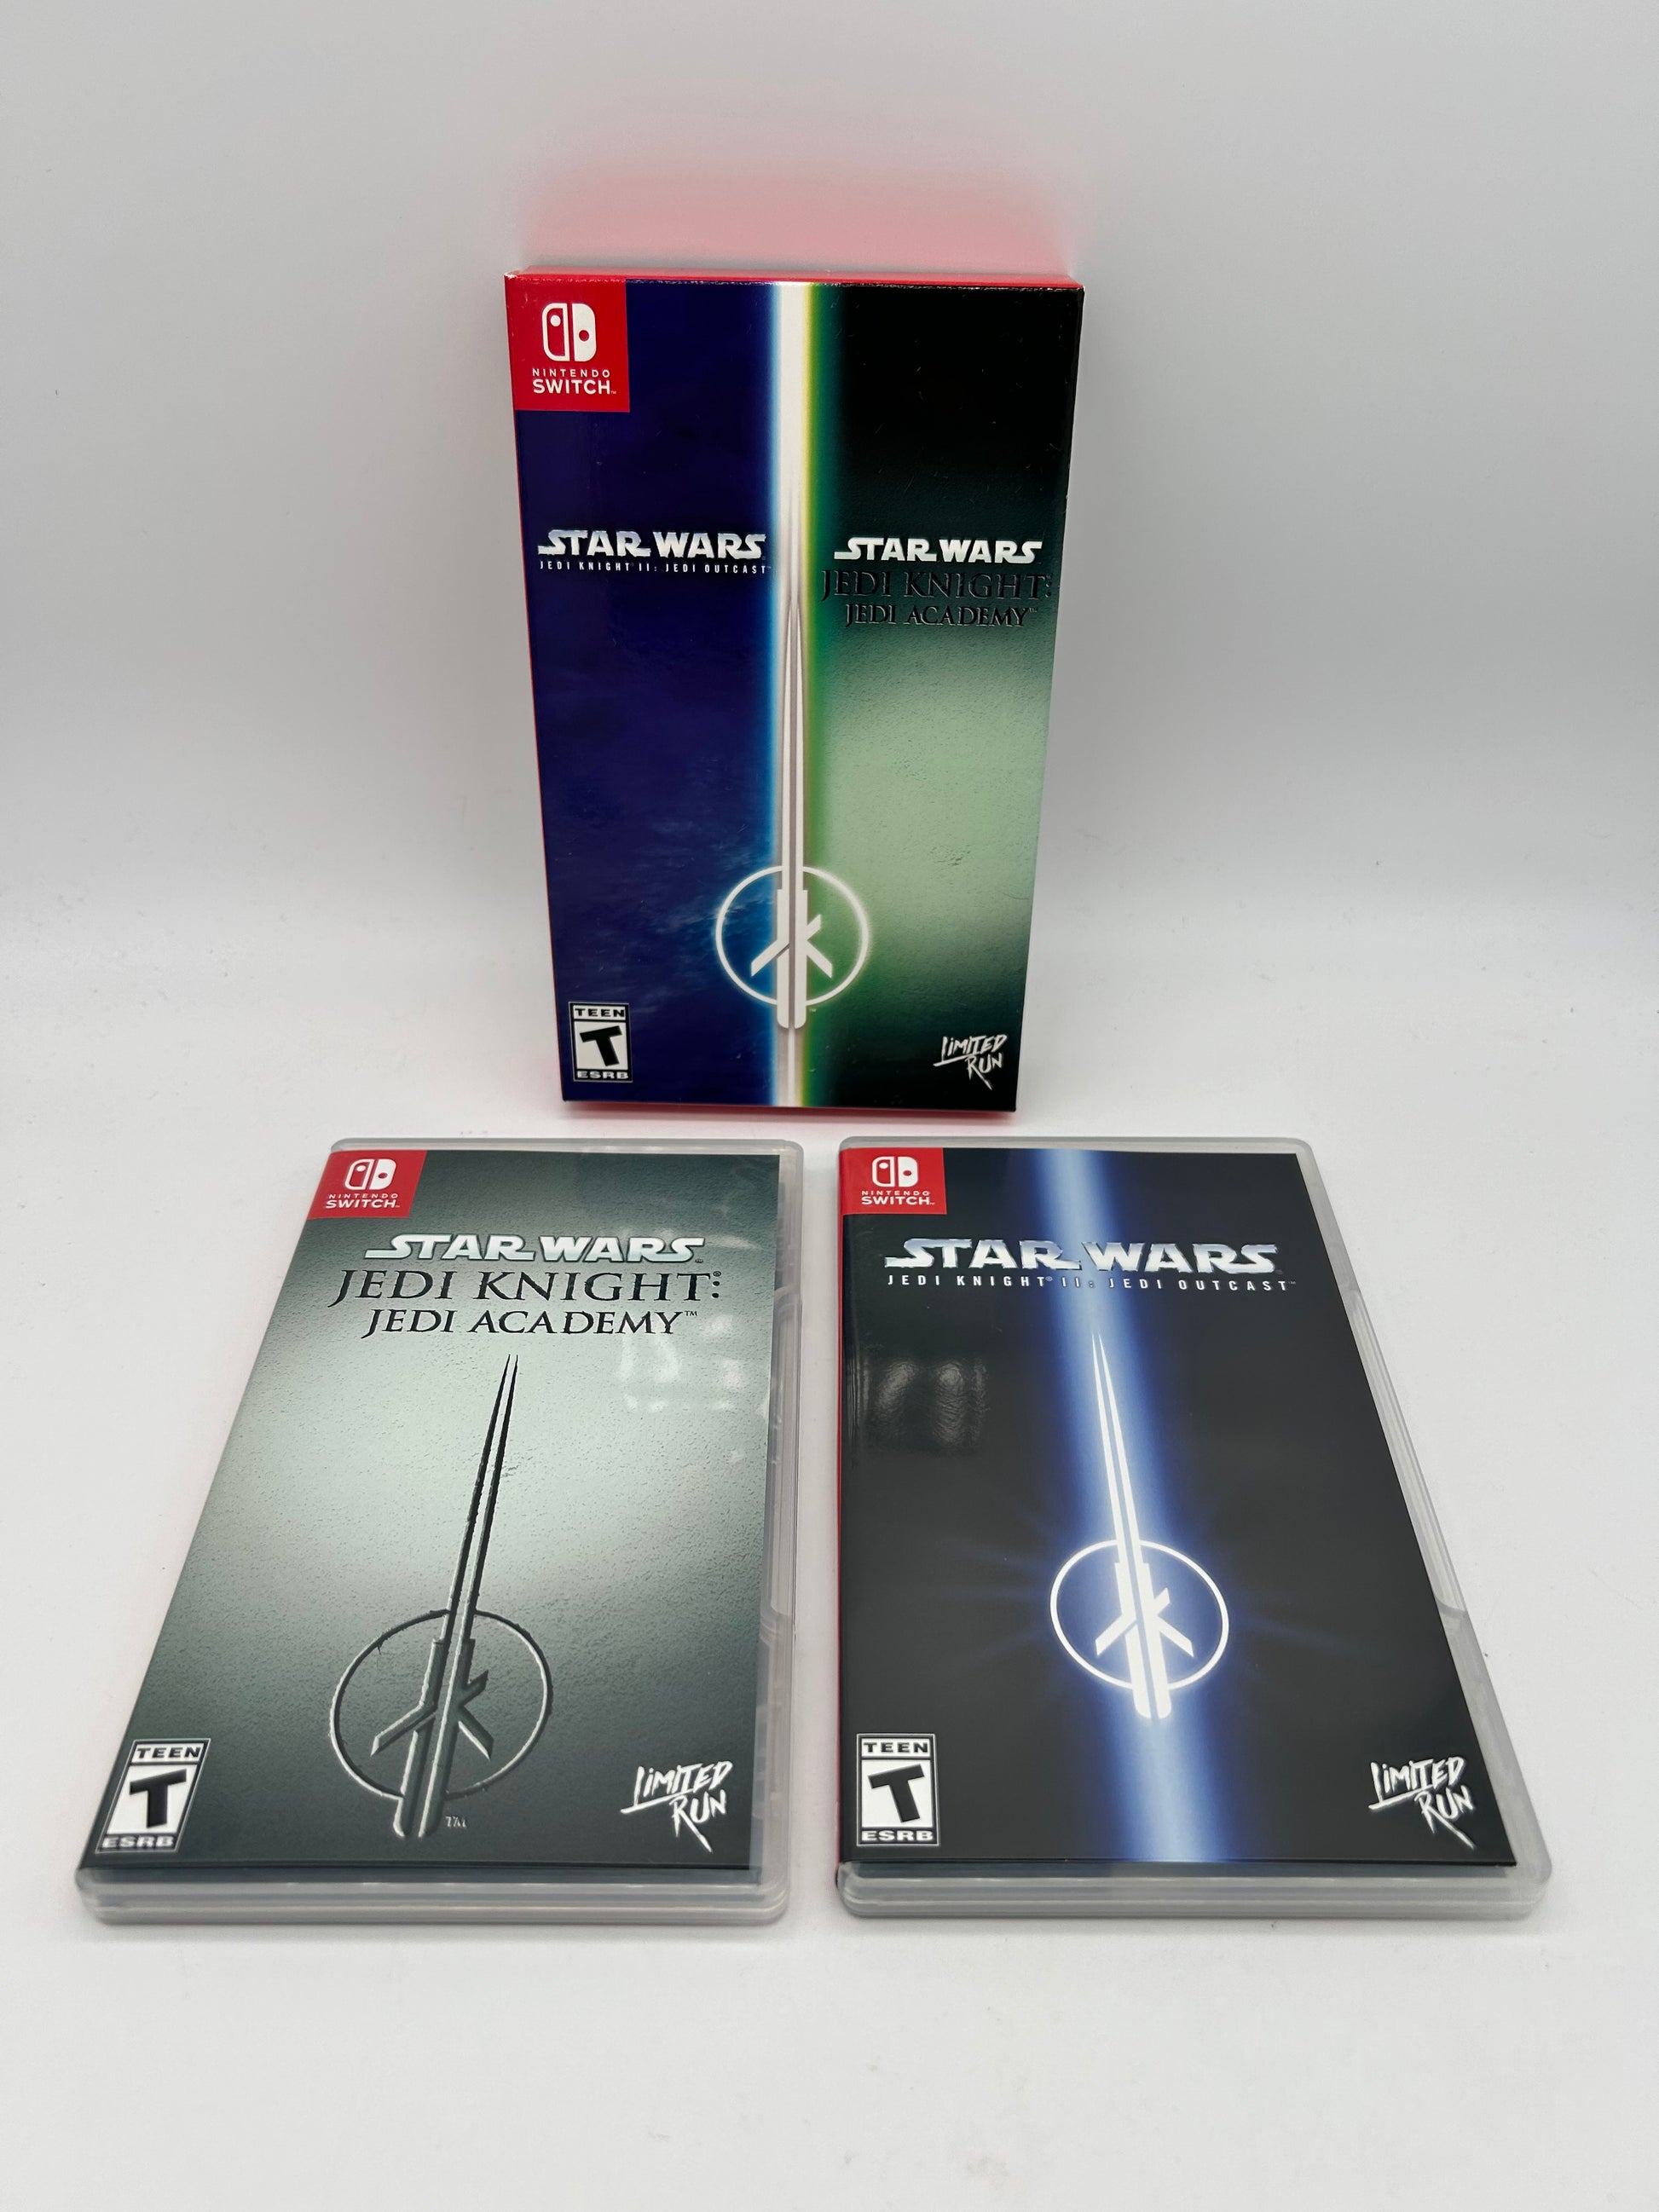 PiXEL-RETRO.COM : NINTENDO SWITCH NEW SEALED IN BOX COMPLETE MANUAL GAME NTSC STAR WARS JEDI KNIGHT ACADEMY OUTCAST LIMITED RUN 69 70